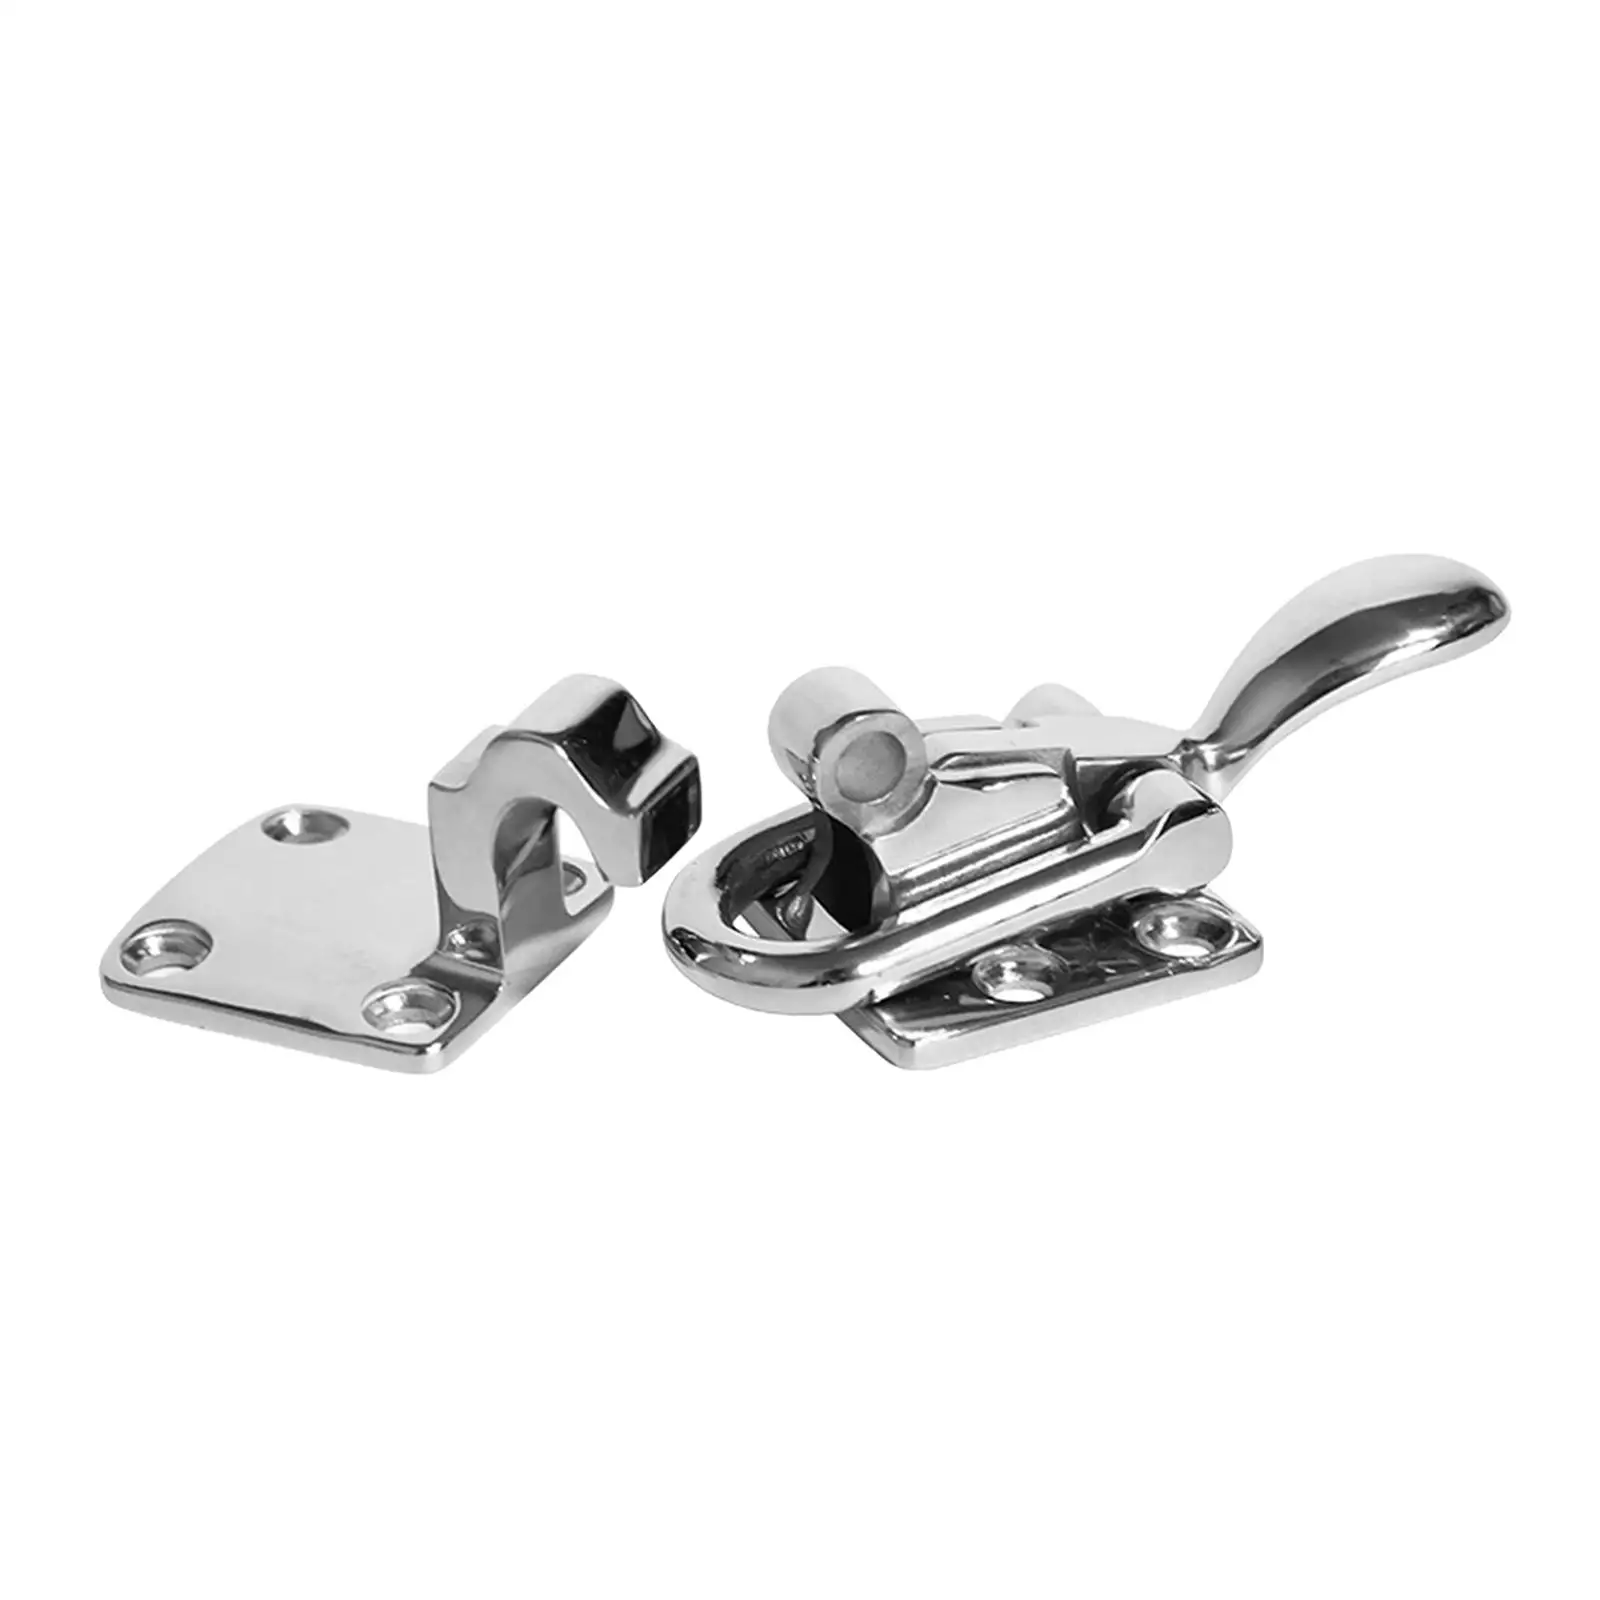 Door Lock Latch Polished Stainless Steel Bag Buckles Anti Rattle Latch Fastener Clamp Fit for Marine Yacht Boats